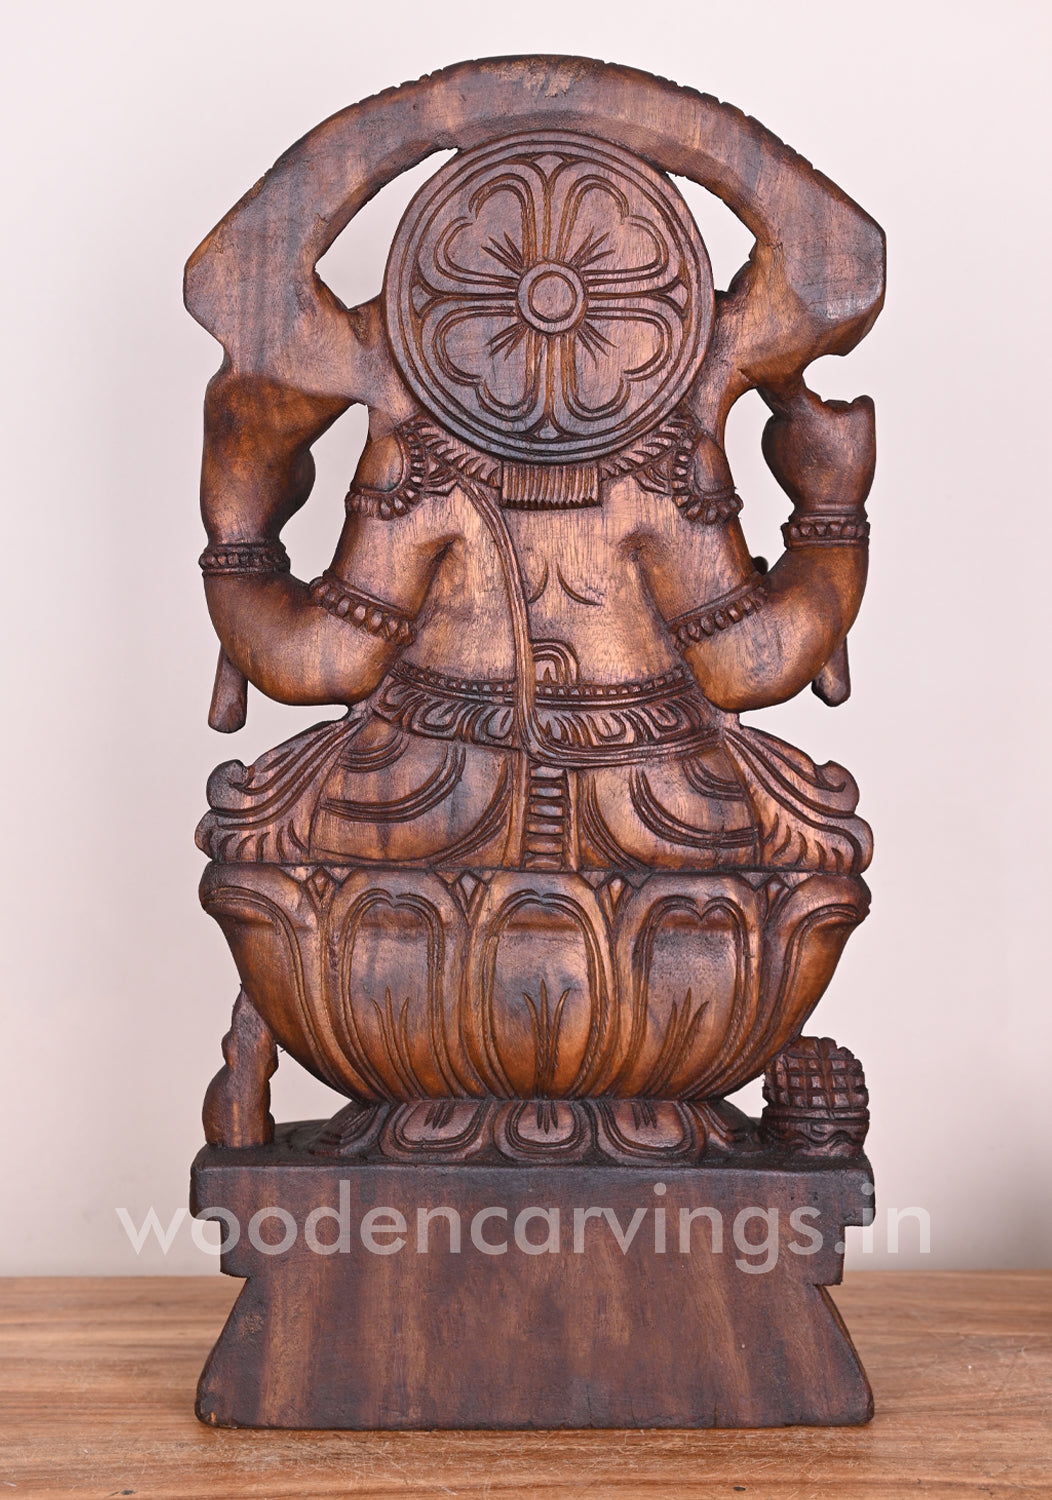 Arch Garland Ganesha on Petal Lotus With His Vahana Mouse Showpiece Wax Brown Sculpture 24"